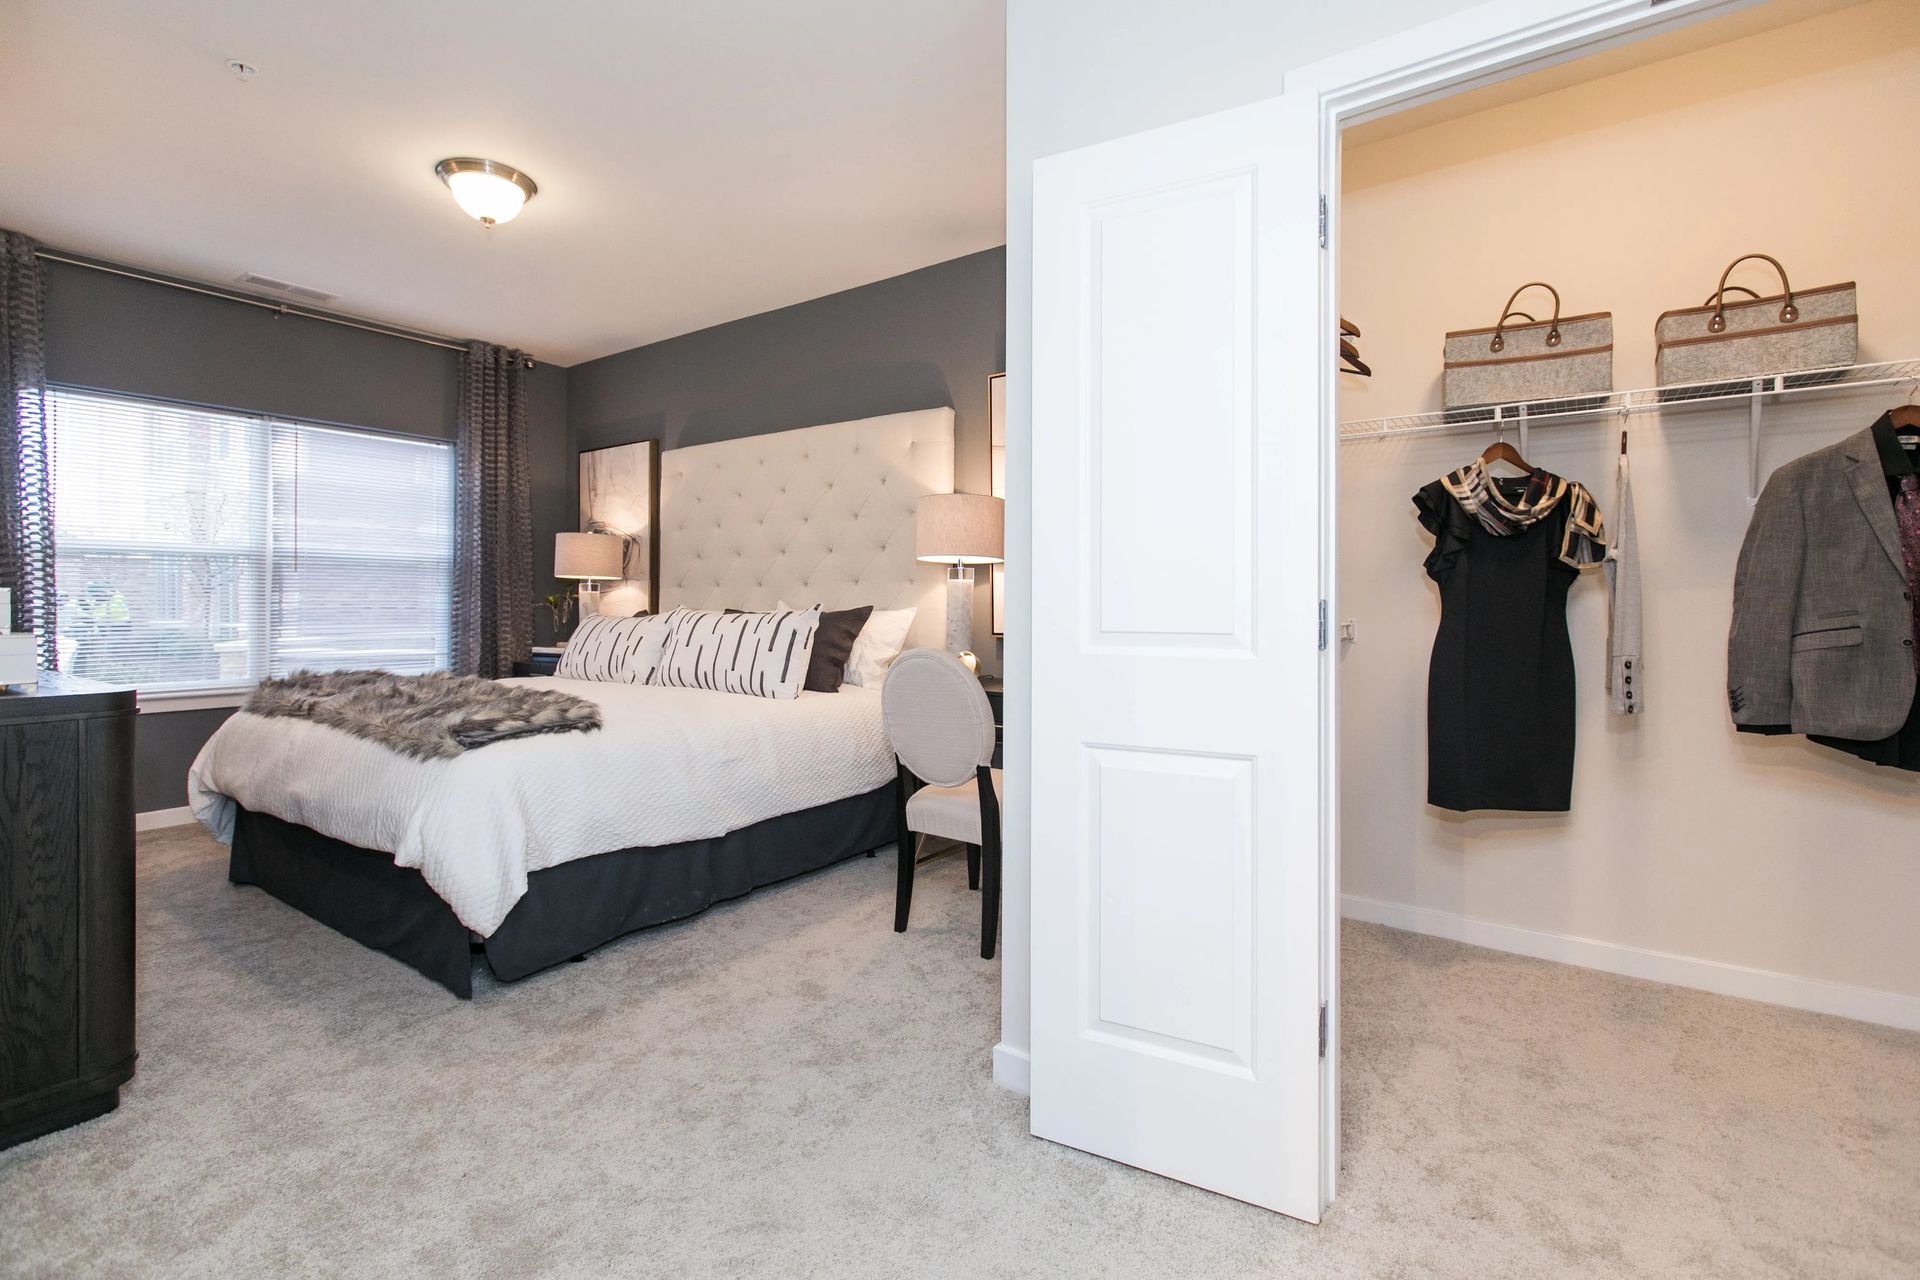 Carpeted bedroom and walk-in closet at Verde at Howard Square.